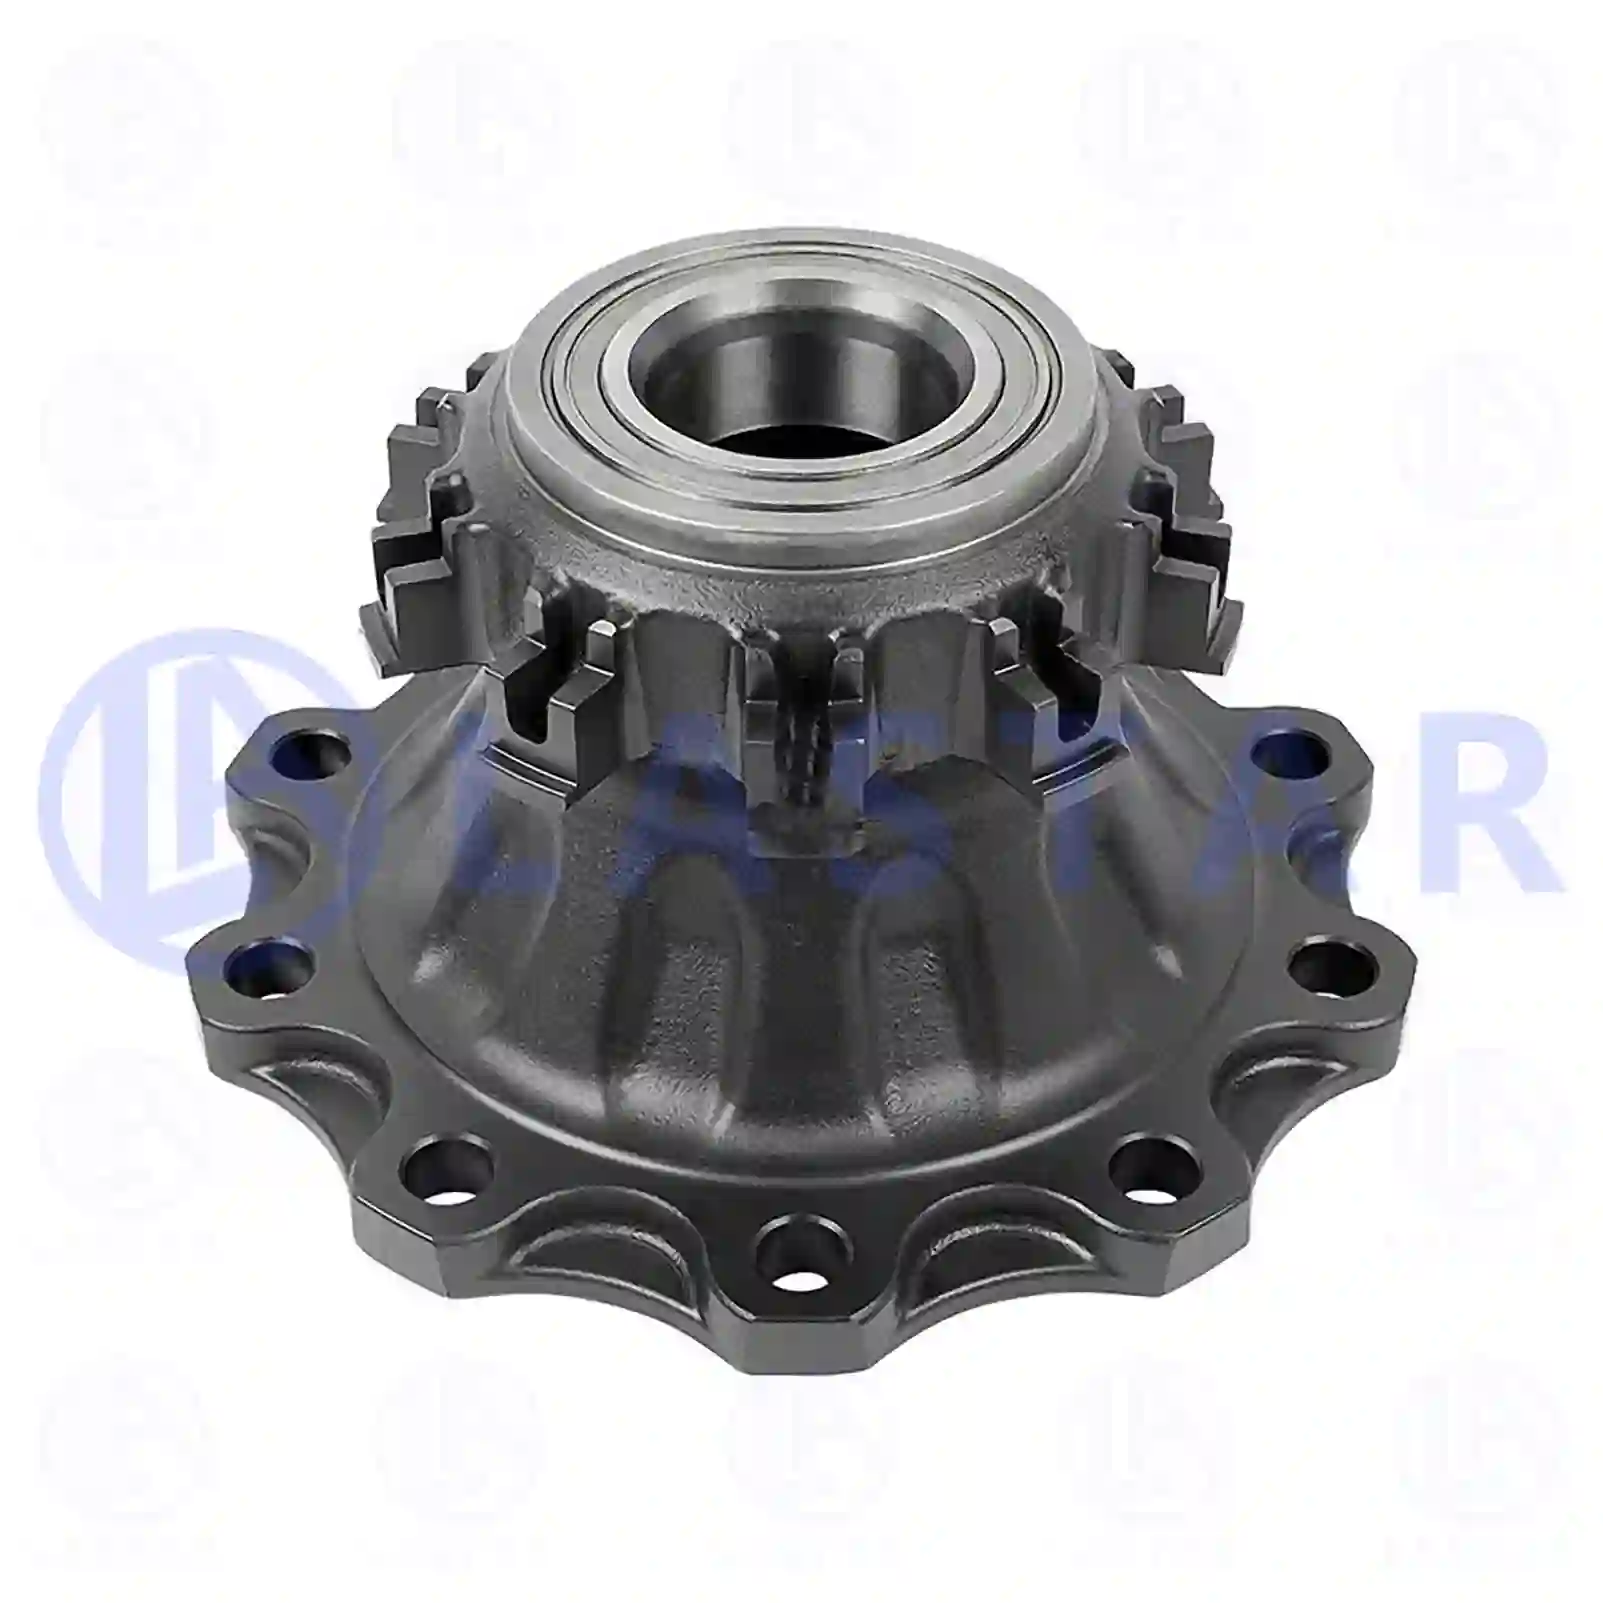 Wheel hub, without bearings, 77726489, 1812160, 2019833, , , , ||  77726489 Lastar Spare Part | Truck Spare Parts, Auotomotive Spare Parts Wheel hub, without bearings, 77726489, 1812160, 2019833, , , , ||  77726489 Lastar Spare Part | Truck Spare Parts, Auotomotive Spare Parts